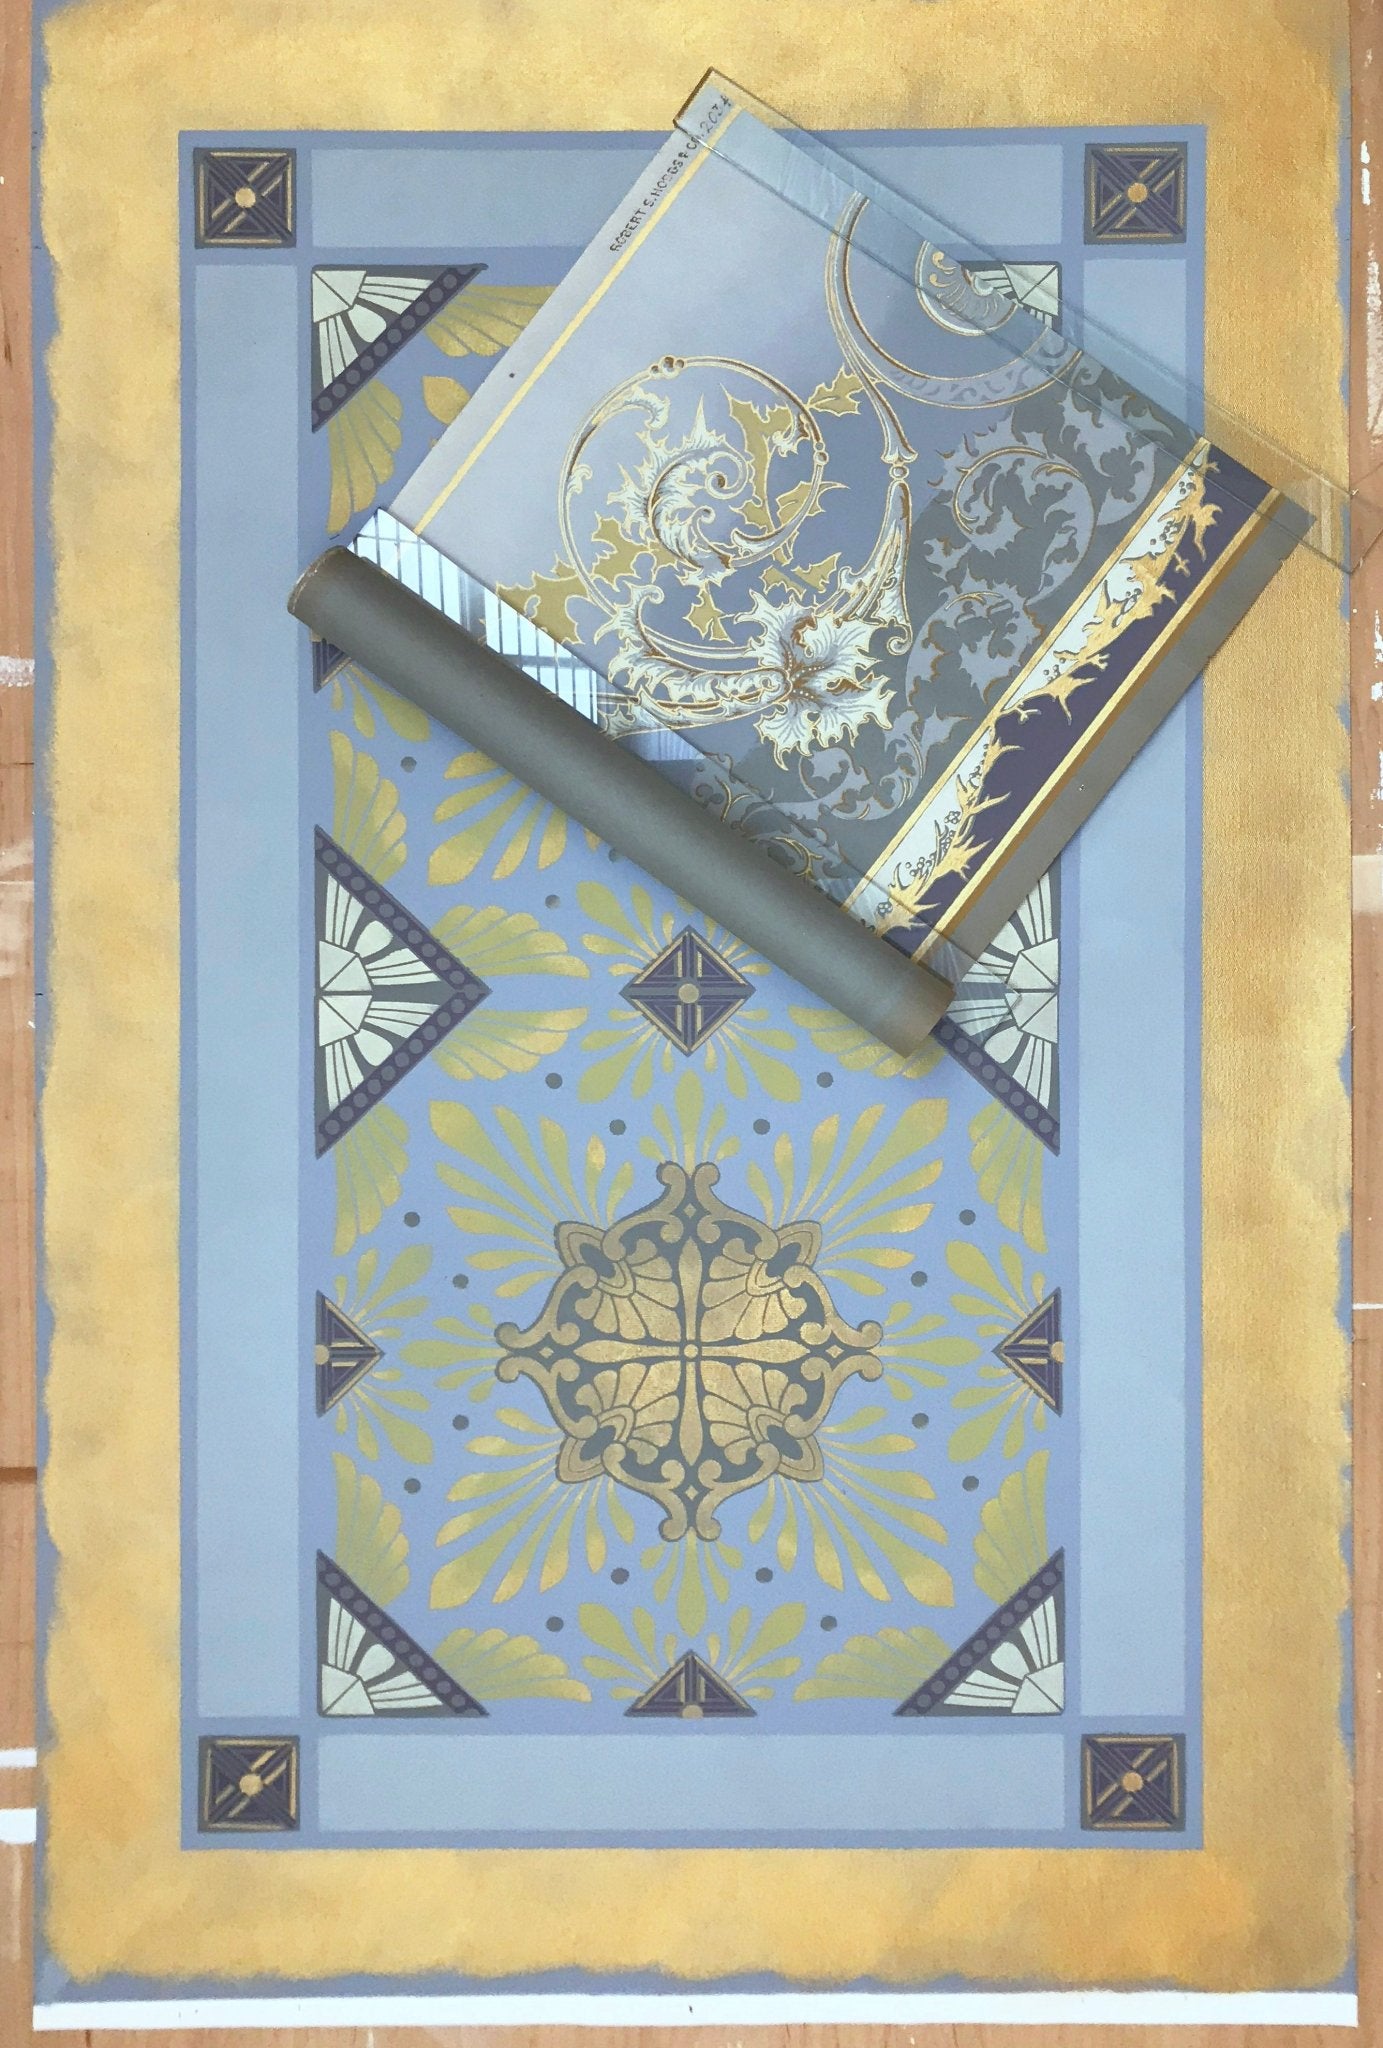 This image shows this floorcloth, based on a Christopher Dresser pattern, with it's palette inspiration, a piece of wallpaper, c. 1880, lying on top.